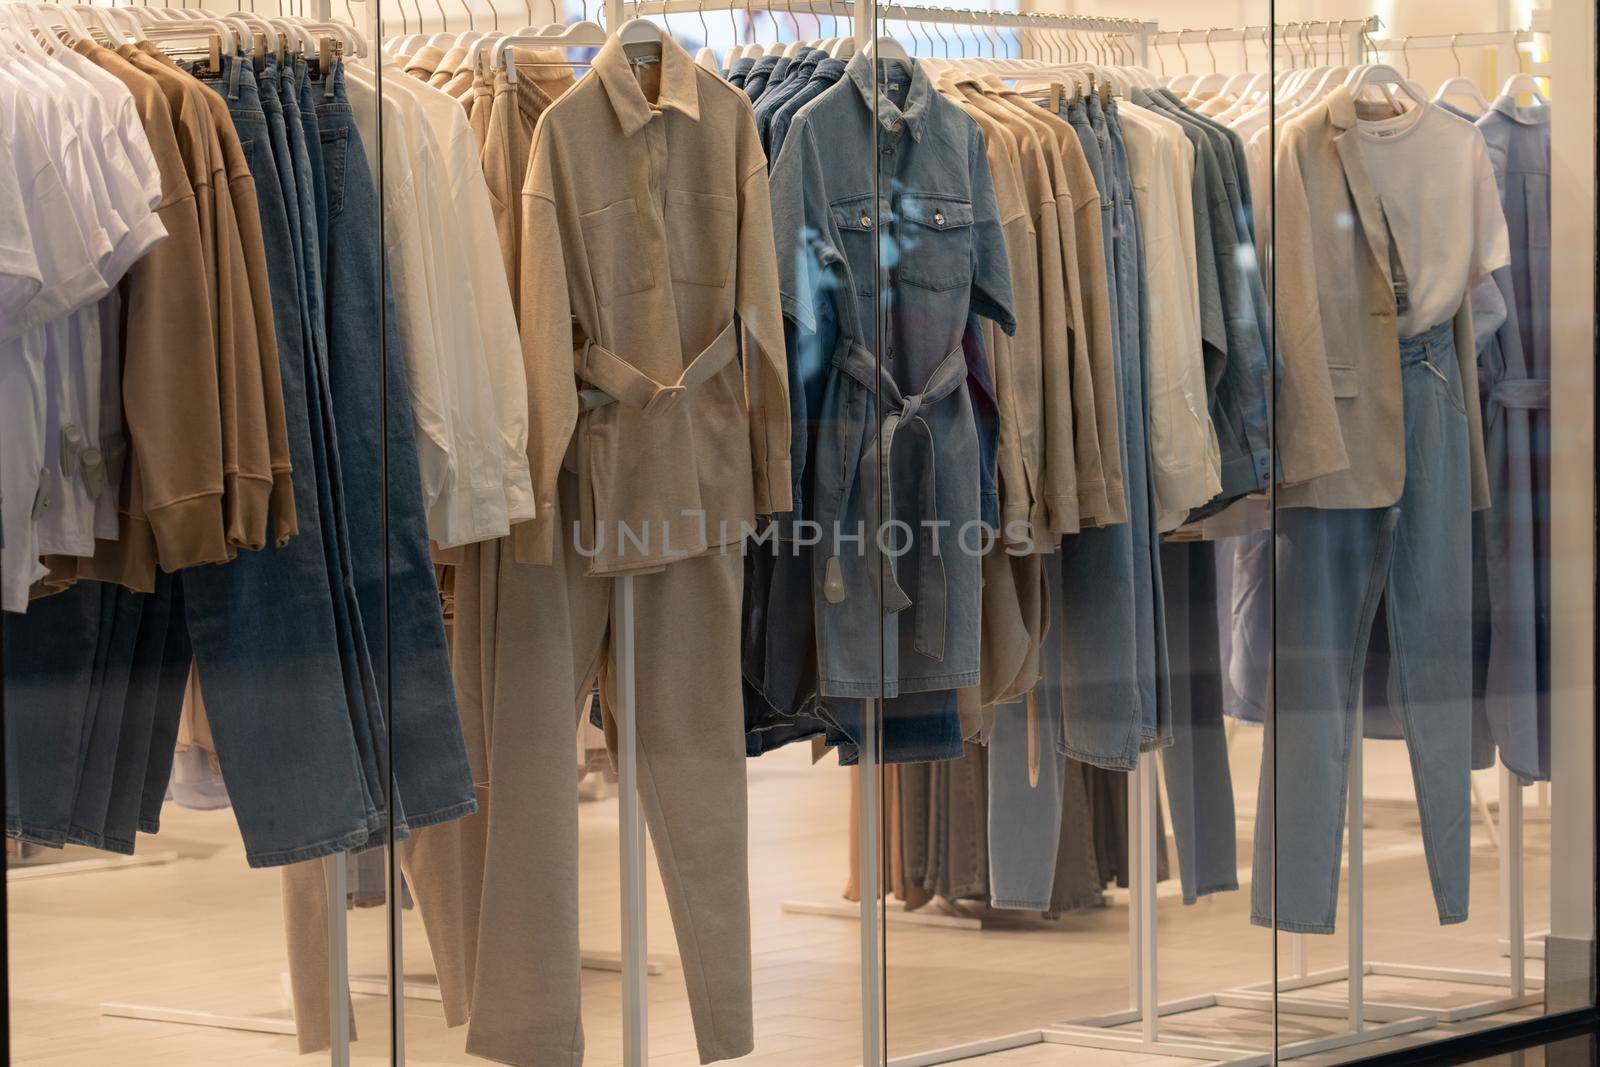 Showcase with female clothes in clothing store, nobody. Coats, jackets and shoes in fashion boutique